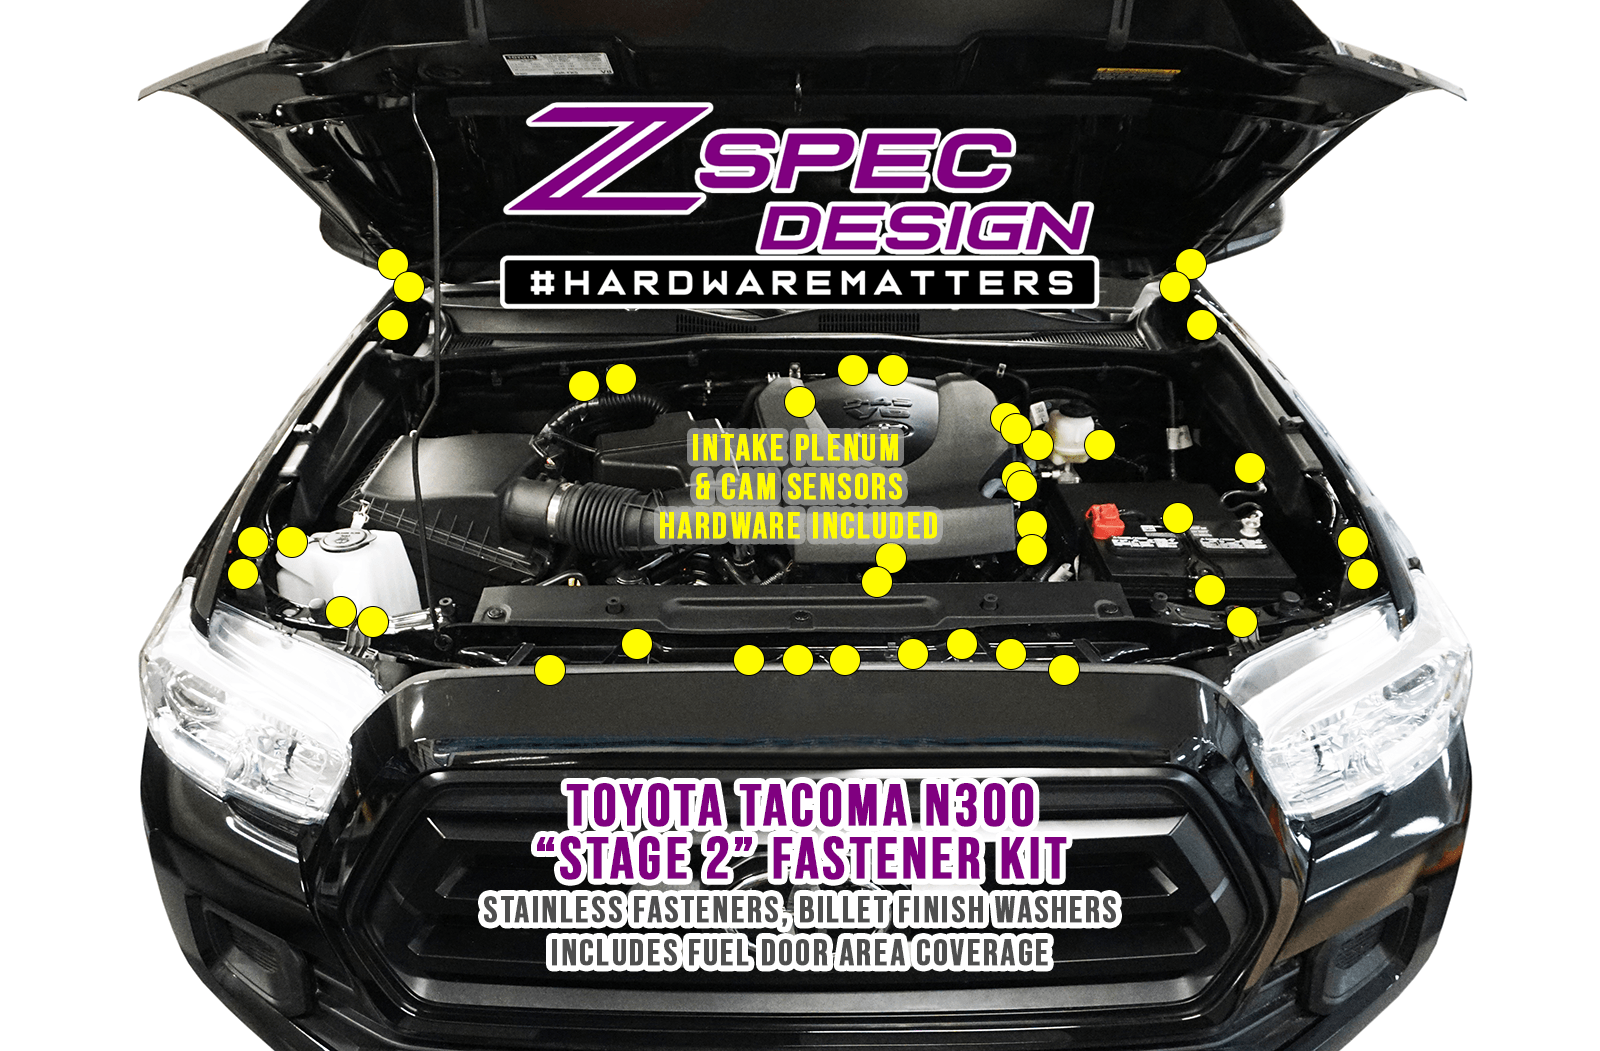 ZSPEC "Stage 2" Dress Up Bolts® Fastener Kit for '16-23 Toyota Tacoma N300, Stainless & Billet  SUS304 6061 Billet Hardware Engine Bay Performance Upgrade Modification Car Auto Vehicle Drift rwd usdm